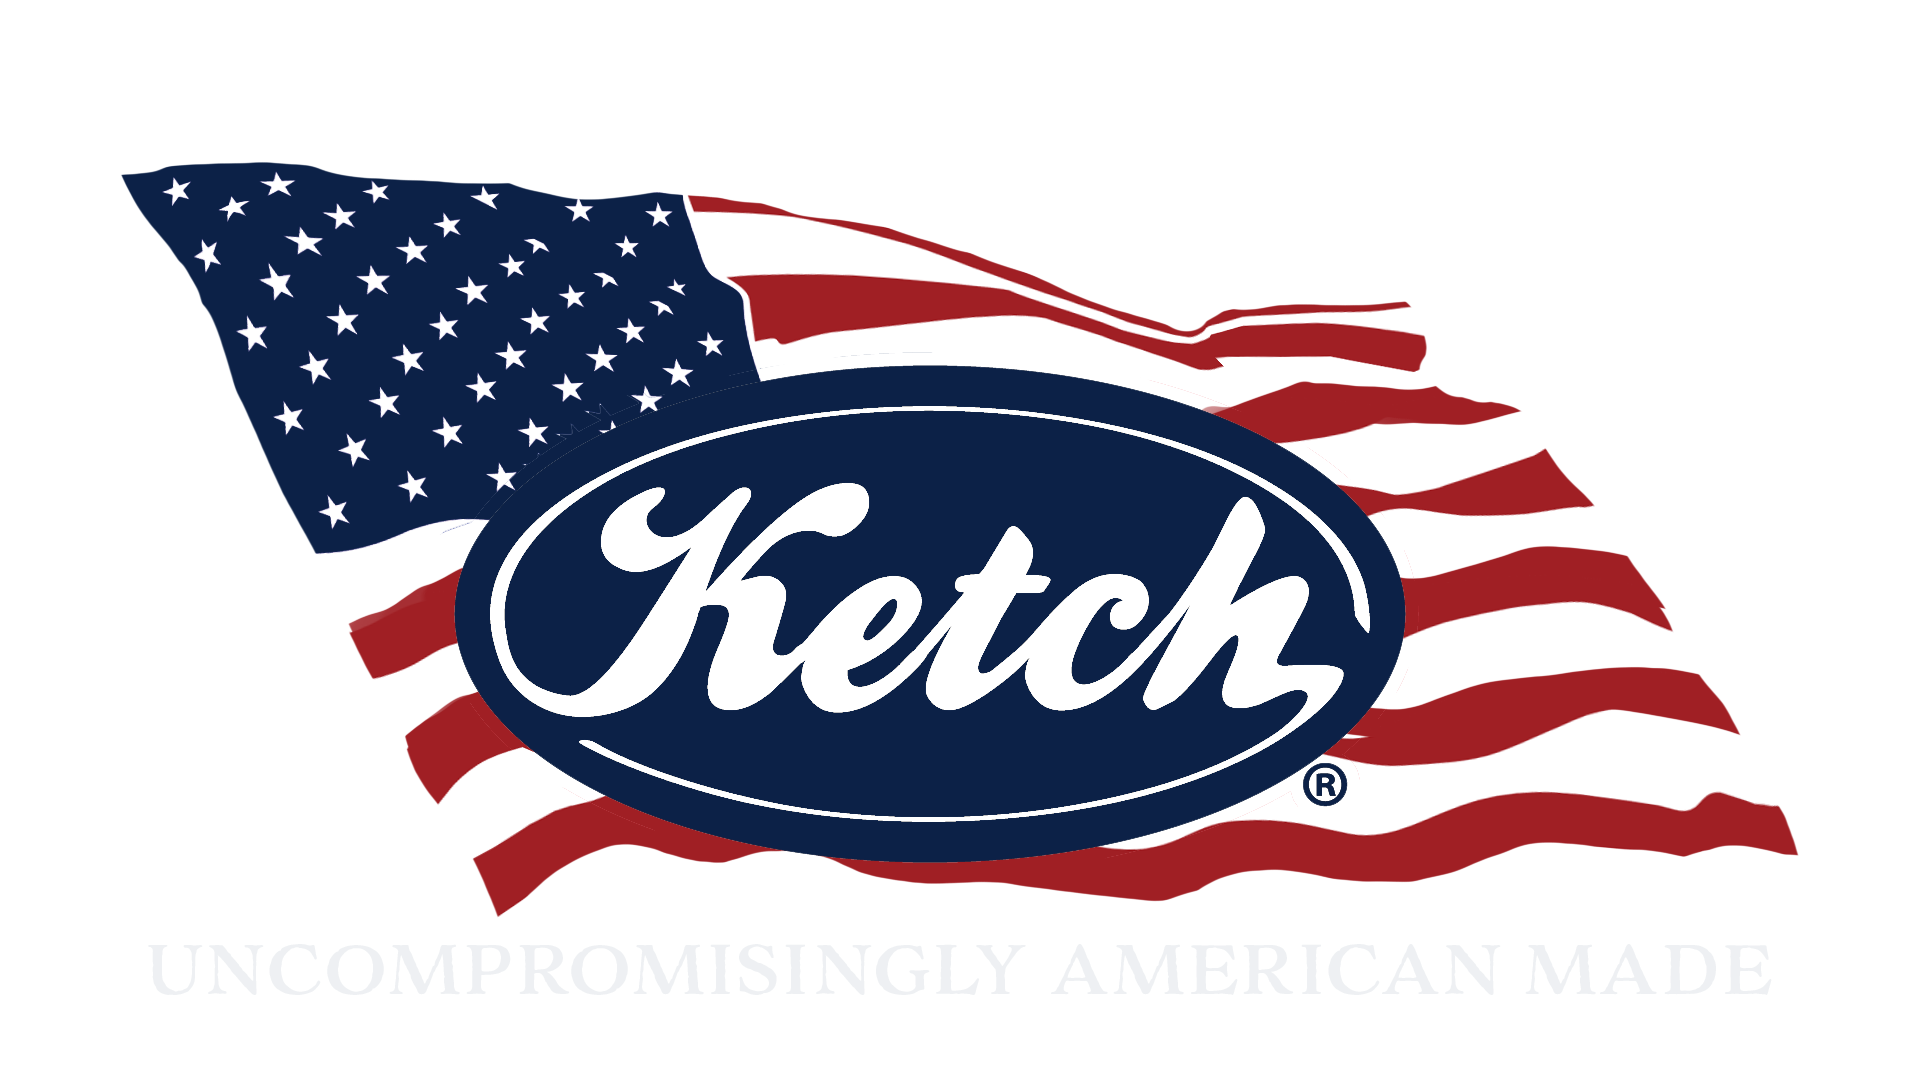 Ketch Products are made in the United States of America with American Materials.